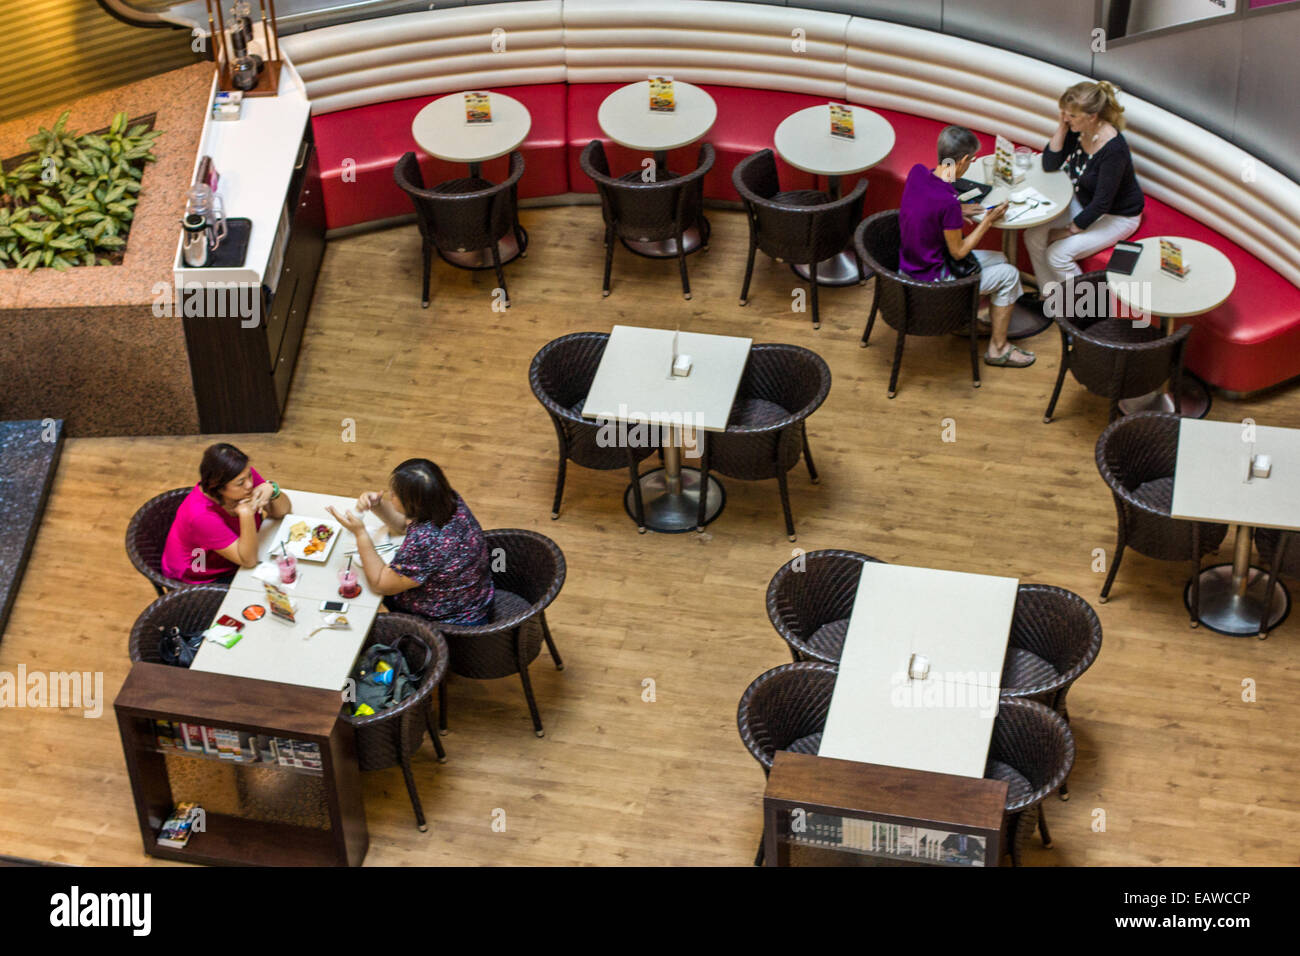 View looking down on diners at mall restaurant. Stock Photo